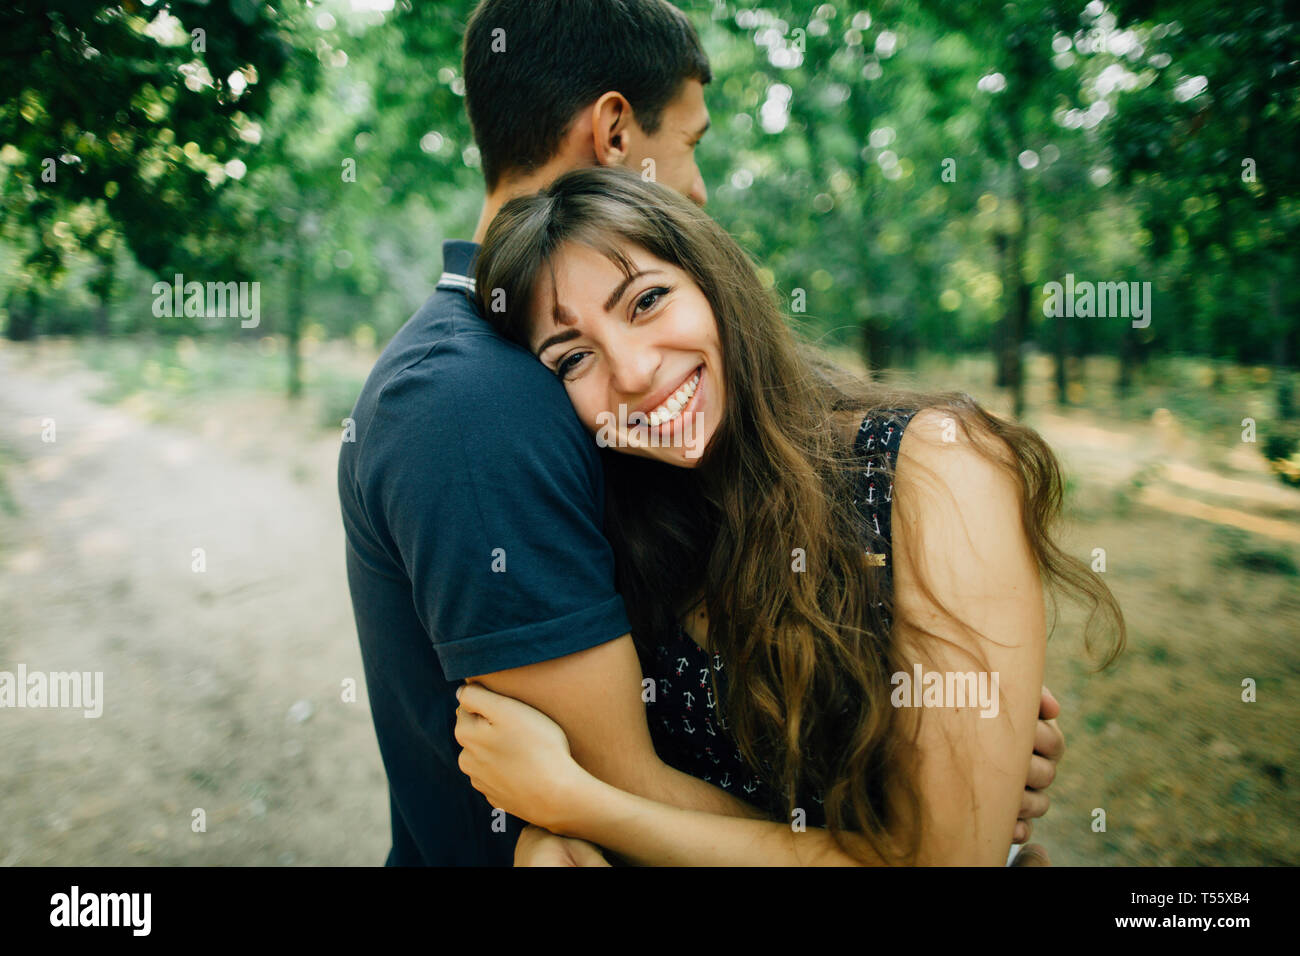 Young couple embracing in park Stock Photo